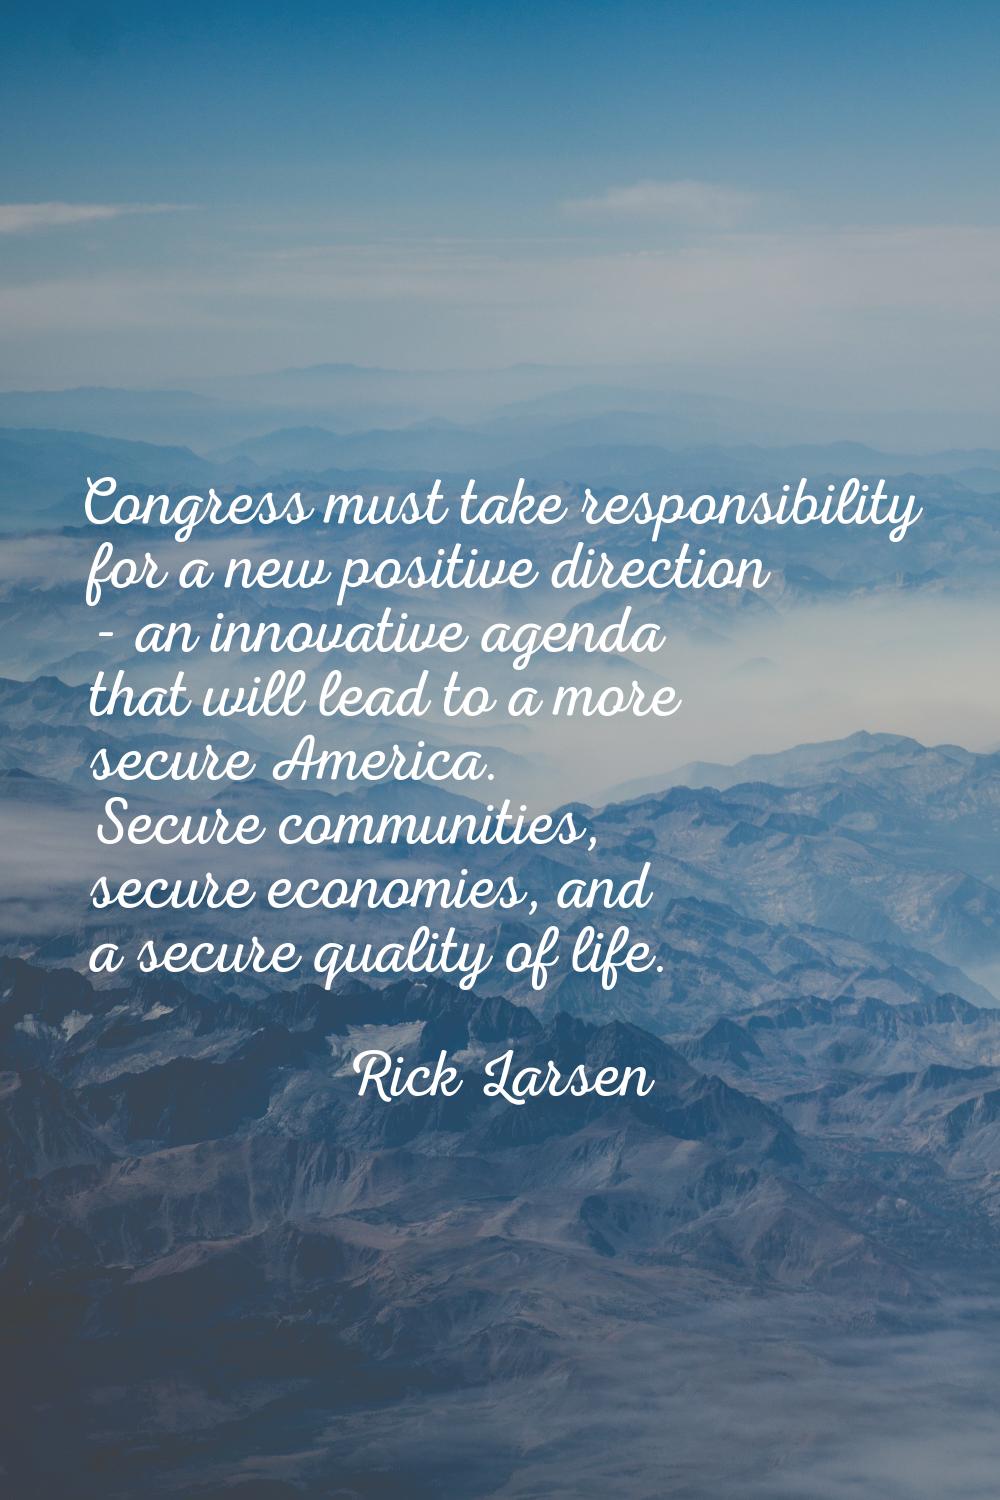 Congress must take responsibility for a new positive direction - an innovative agenda that will lea